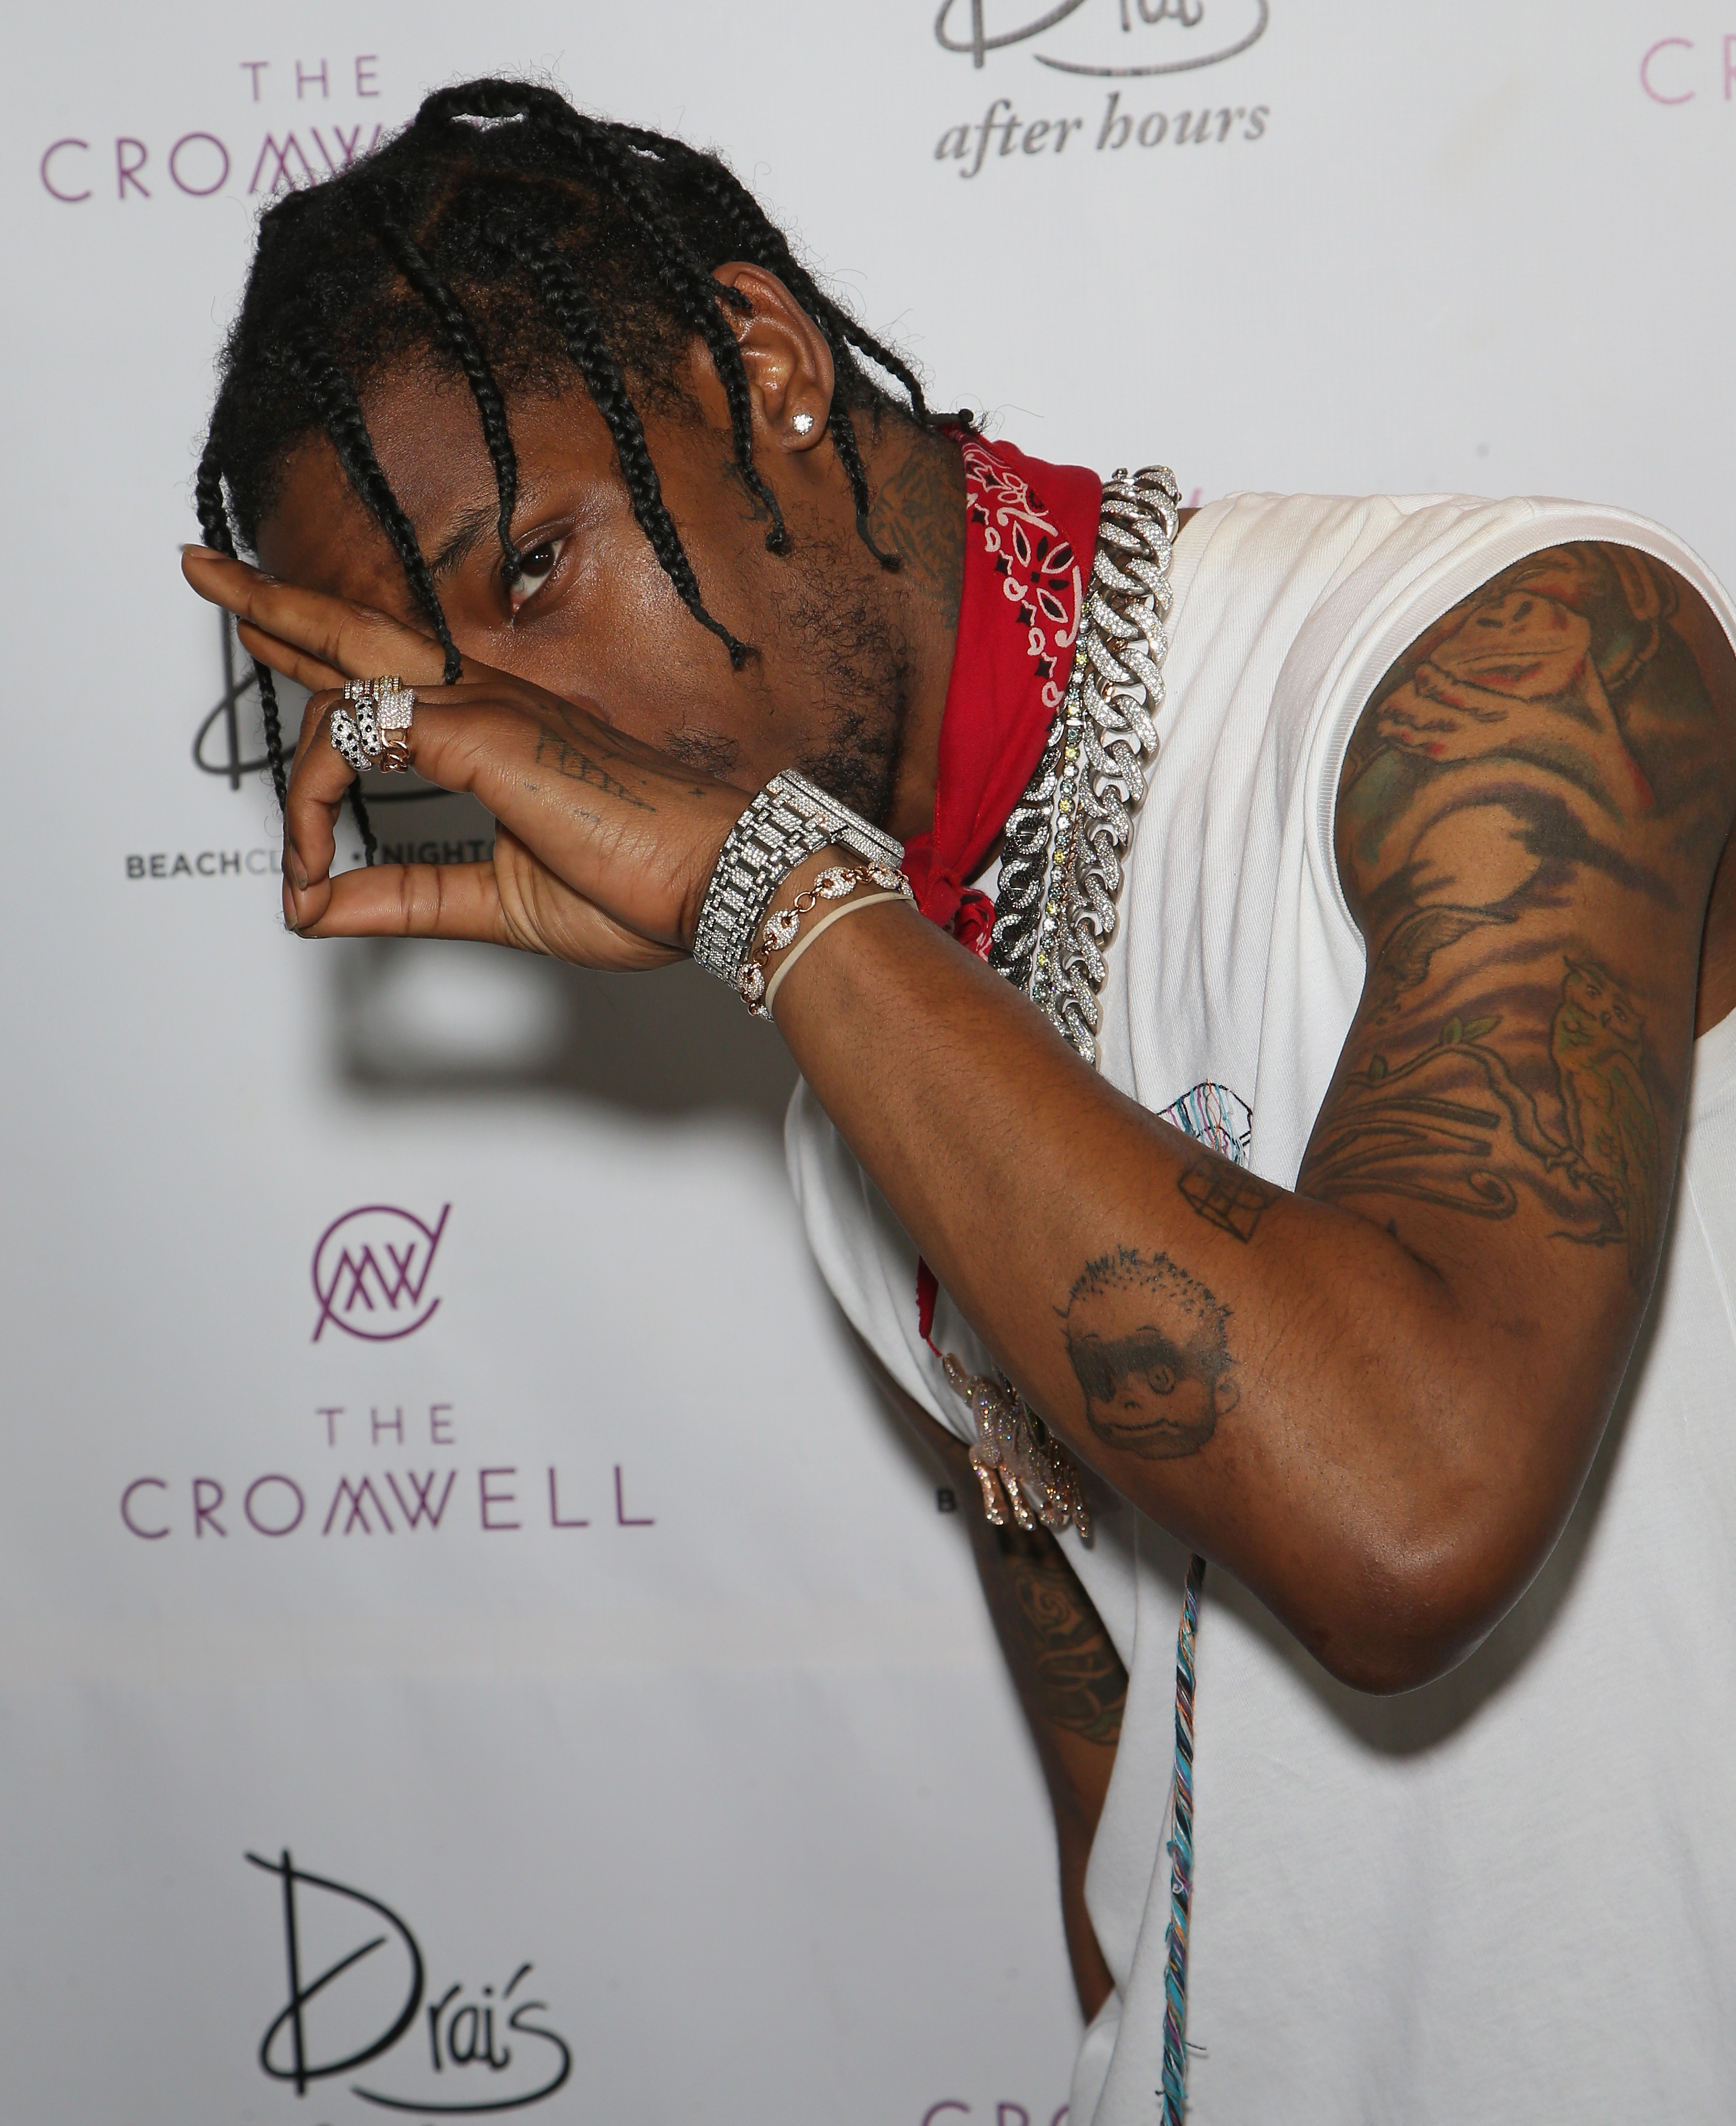 does anyone have any better pictures of travis' wrist tattoo? wanting to  use it as inspiration for designing my next tattoo : r/travisscott